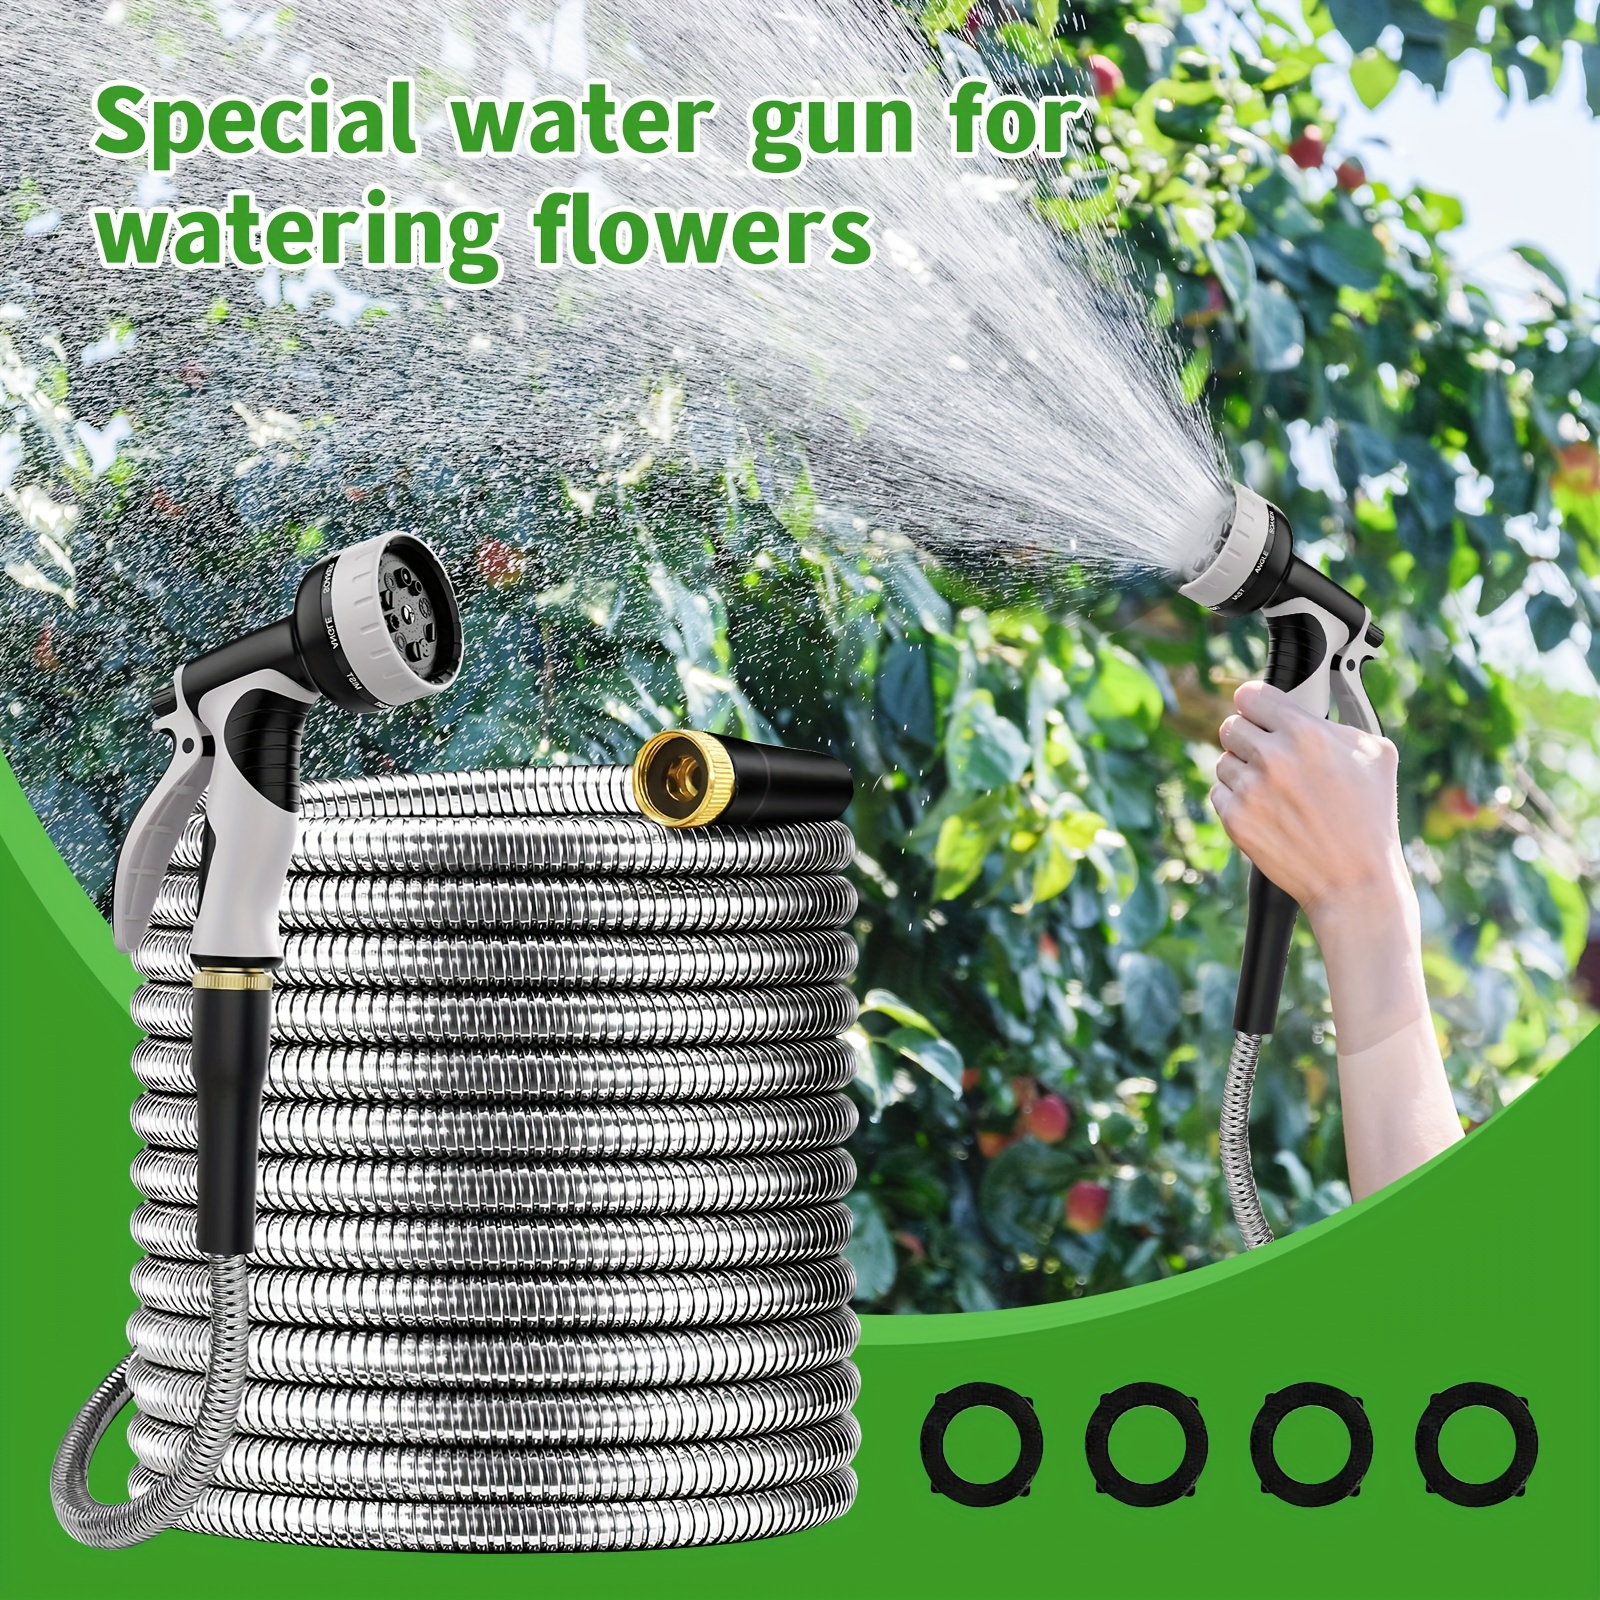 

Garden Hose-50ft/70ft, 304 Metal Heavy Duty Water Hoses With 10 Function Nozzles For Yard, Flexible, Puncture Resistant, Never Kink & , Stainless Steel Garden Hose, Outdoor Water Hoses For Yard